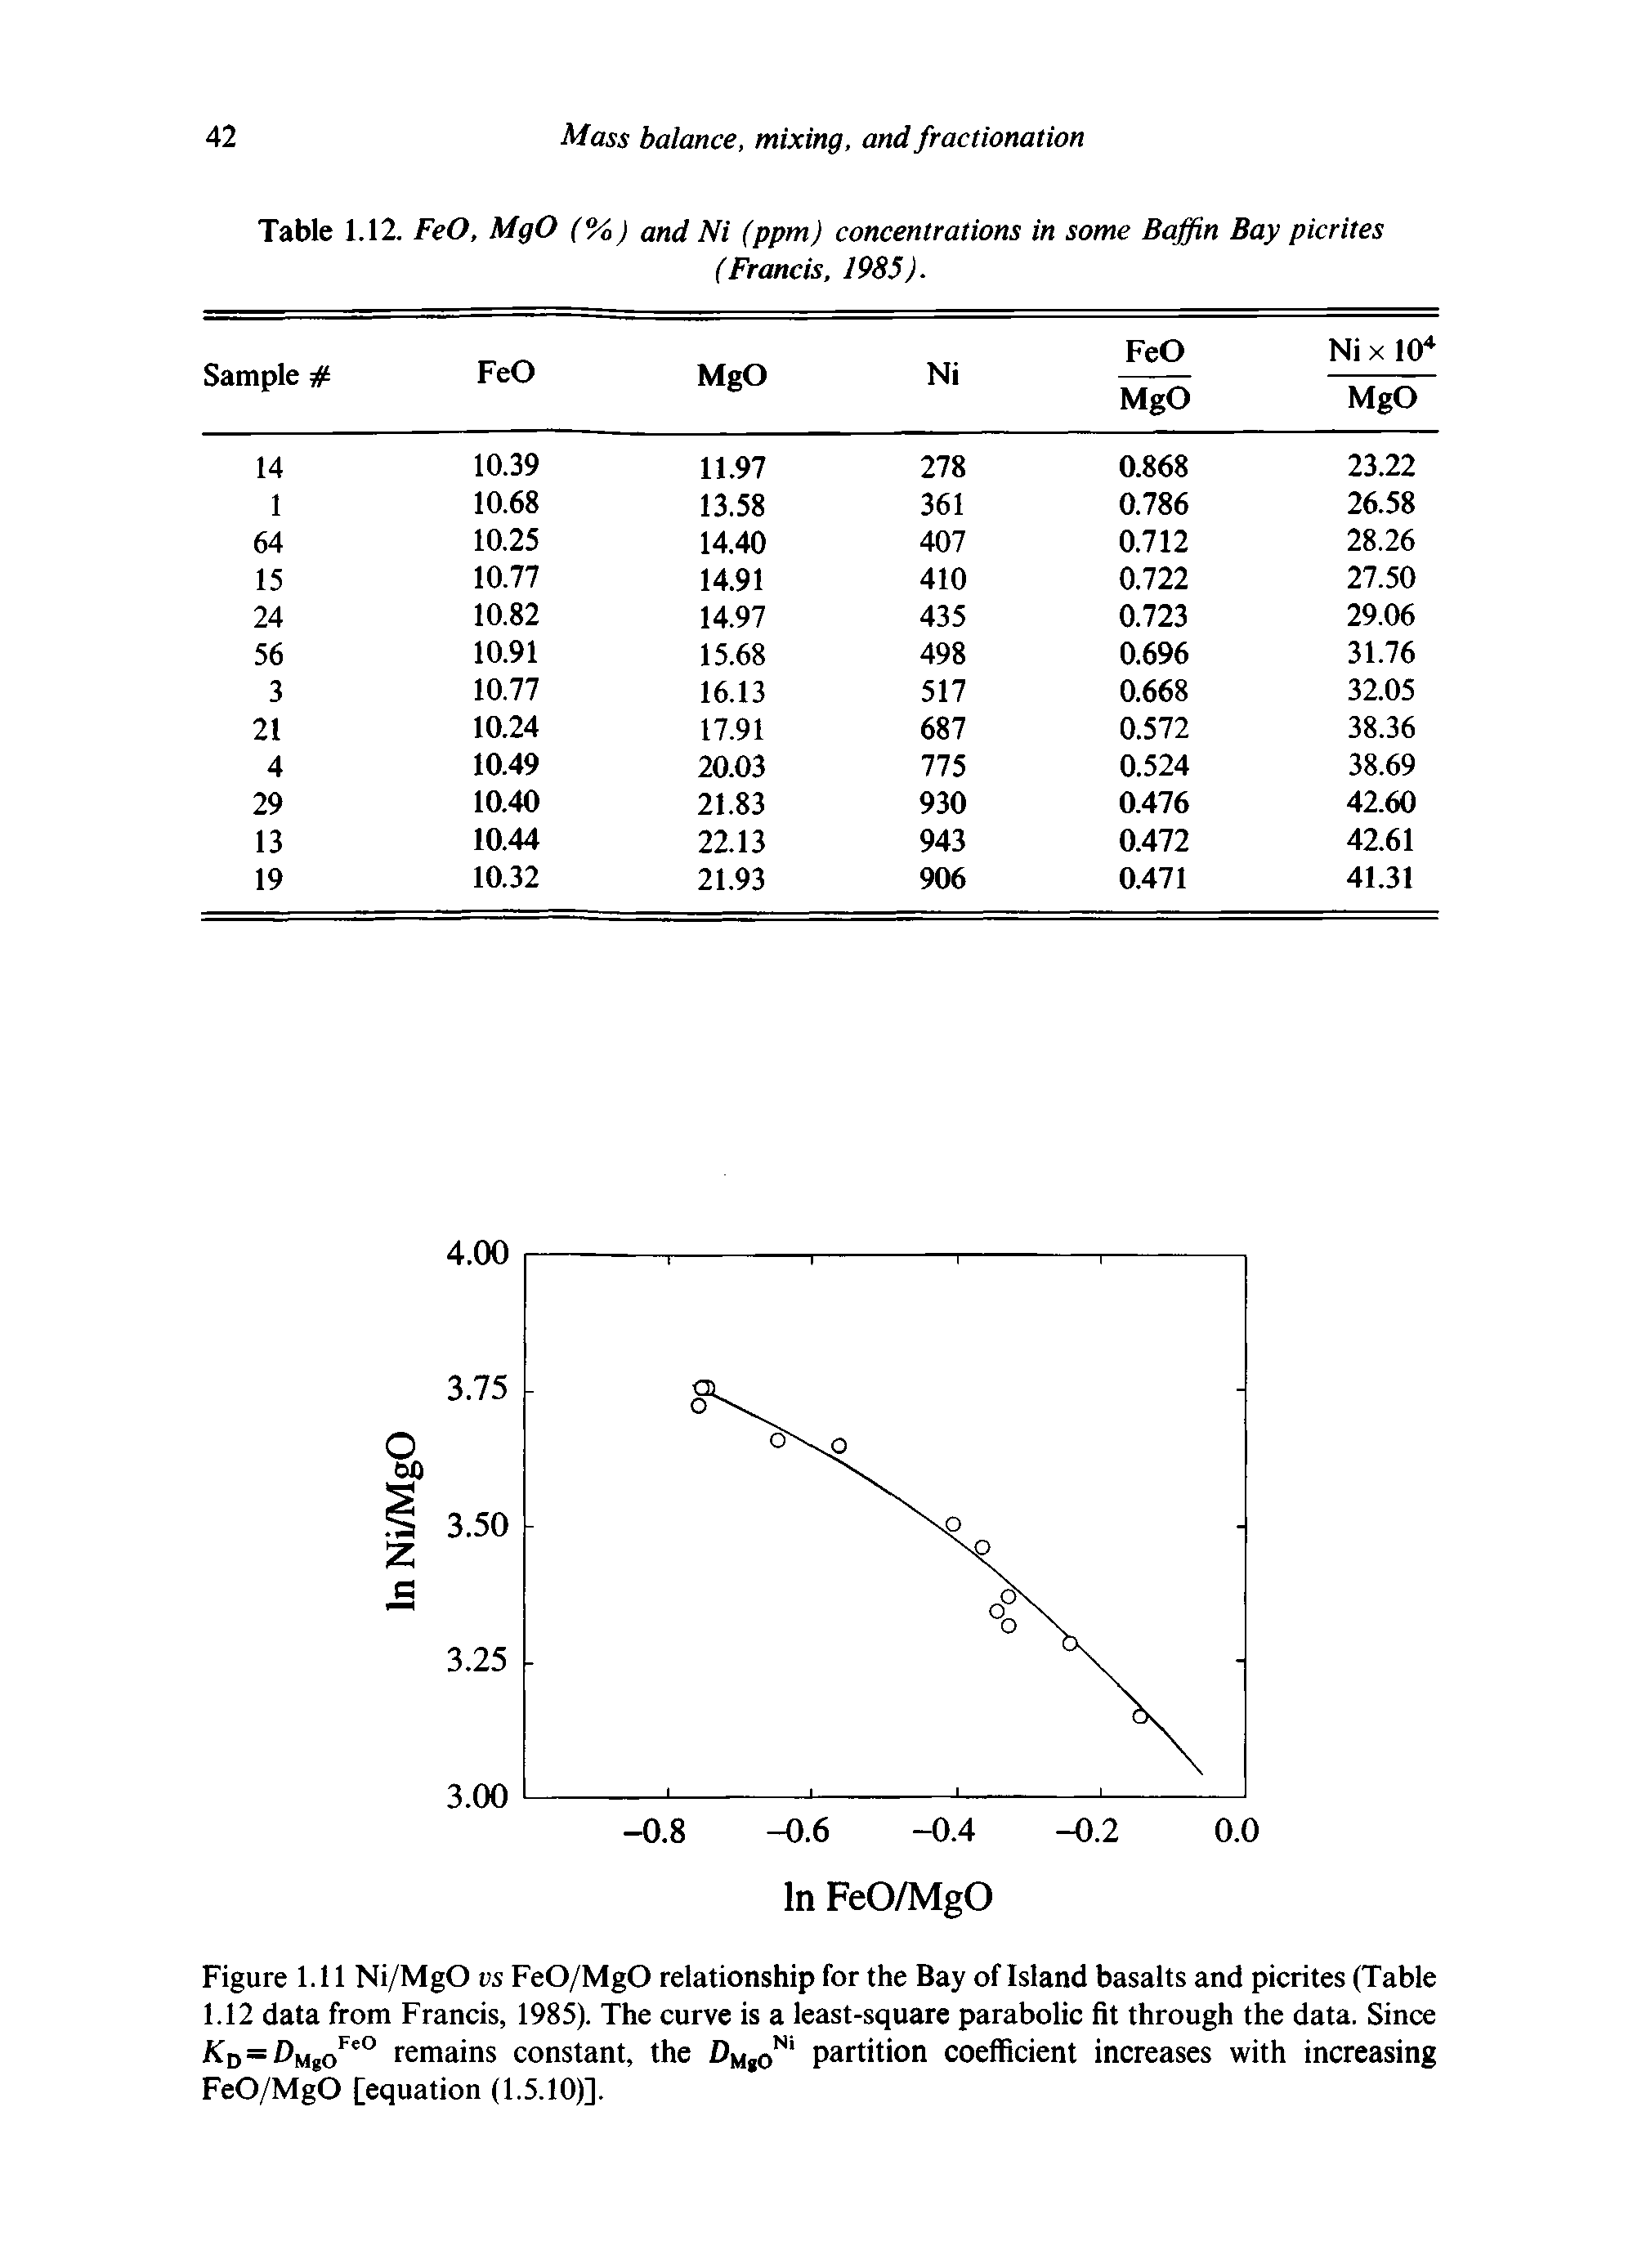 Figure 1.11 Ni/MgO vs FeO/MgO relationship for the Bay of Island basalts and picrites (Table 1.12 data from Francis, 1985). The curve is a least-square parabolic fit through the data. Since D = MgoFe° remains constant, the DMg0Nl partition coefficient increases with increasing FeO/MgO [equation (1.5.10)].